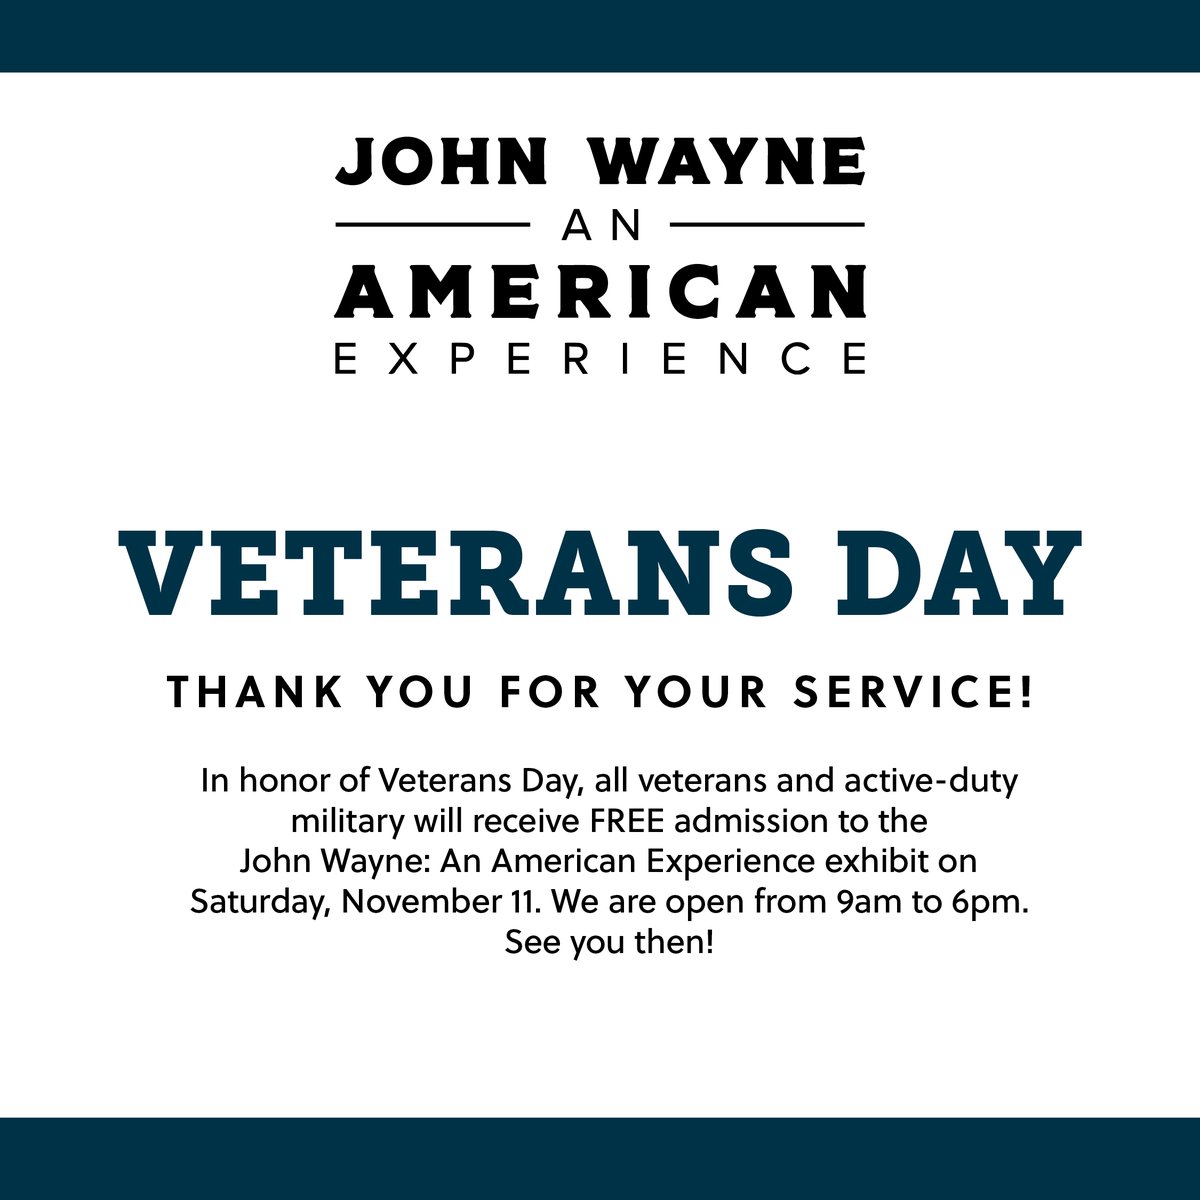 Happy Veterans Day! In appreciation of our past and present military servicemen and women, all Veterans and active-duty military will receive FREE admission to the John Wayne: An American Experience exhibit on Sat Nov 11 in the Fort Worth Stockyards, TX. We're open from 9a to 6p.